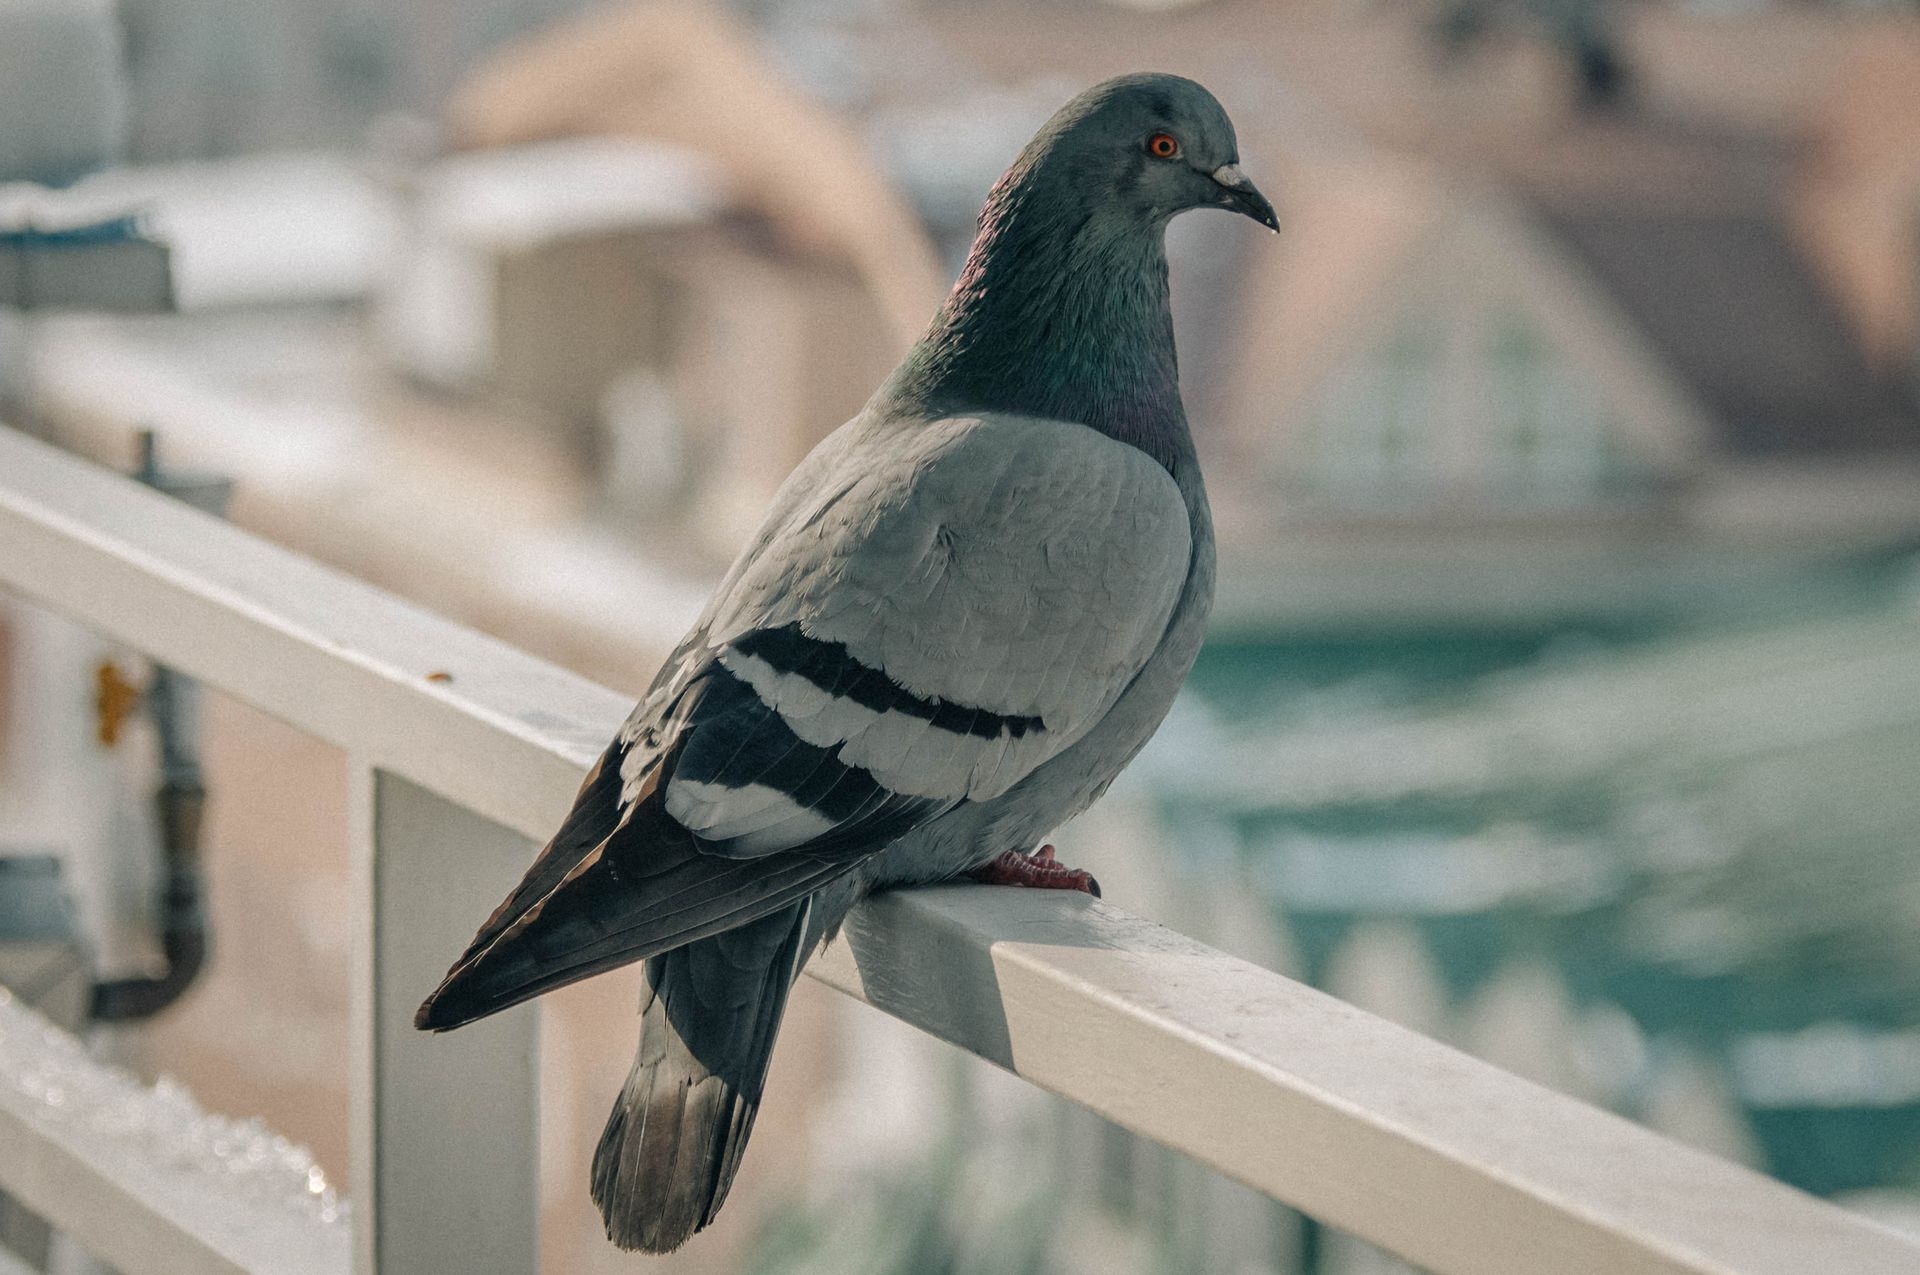 Pigeons using facial recognition software